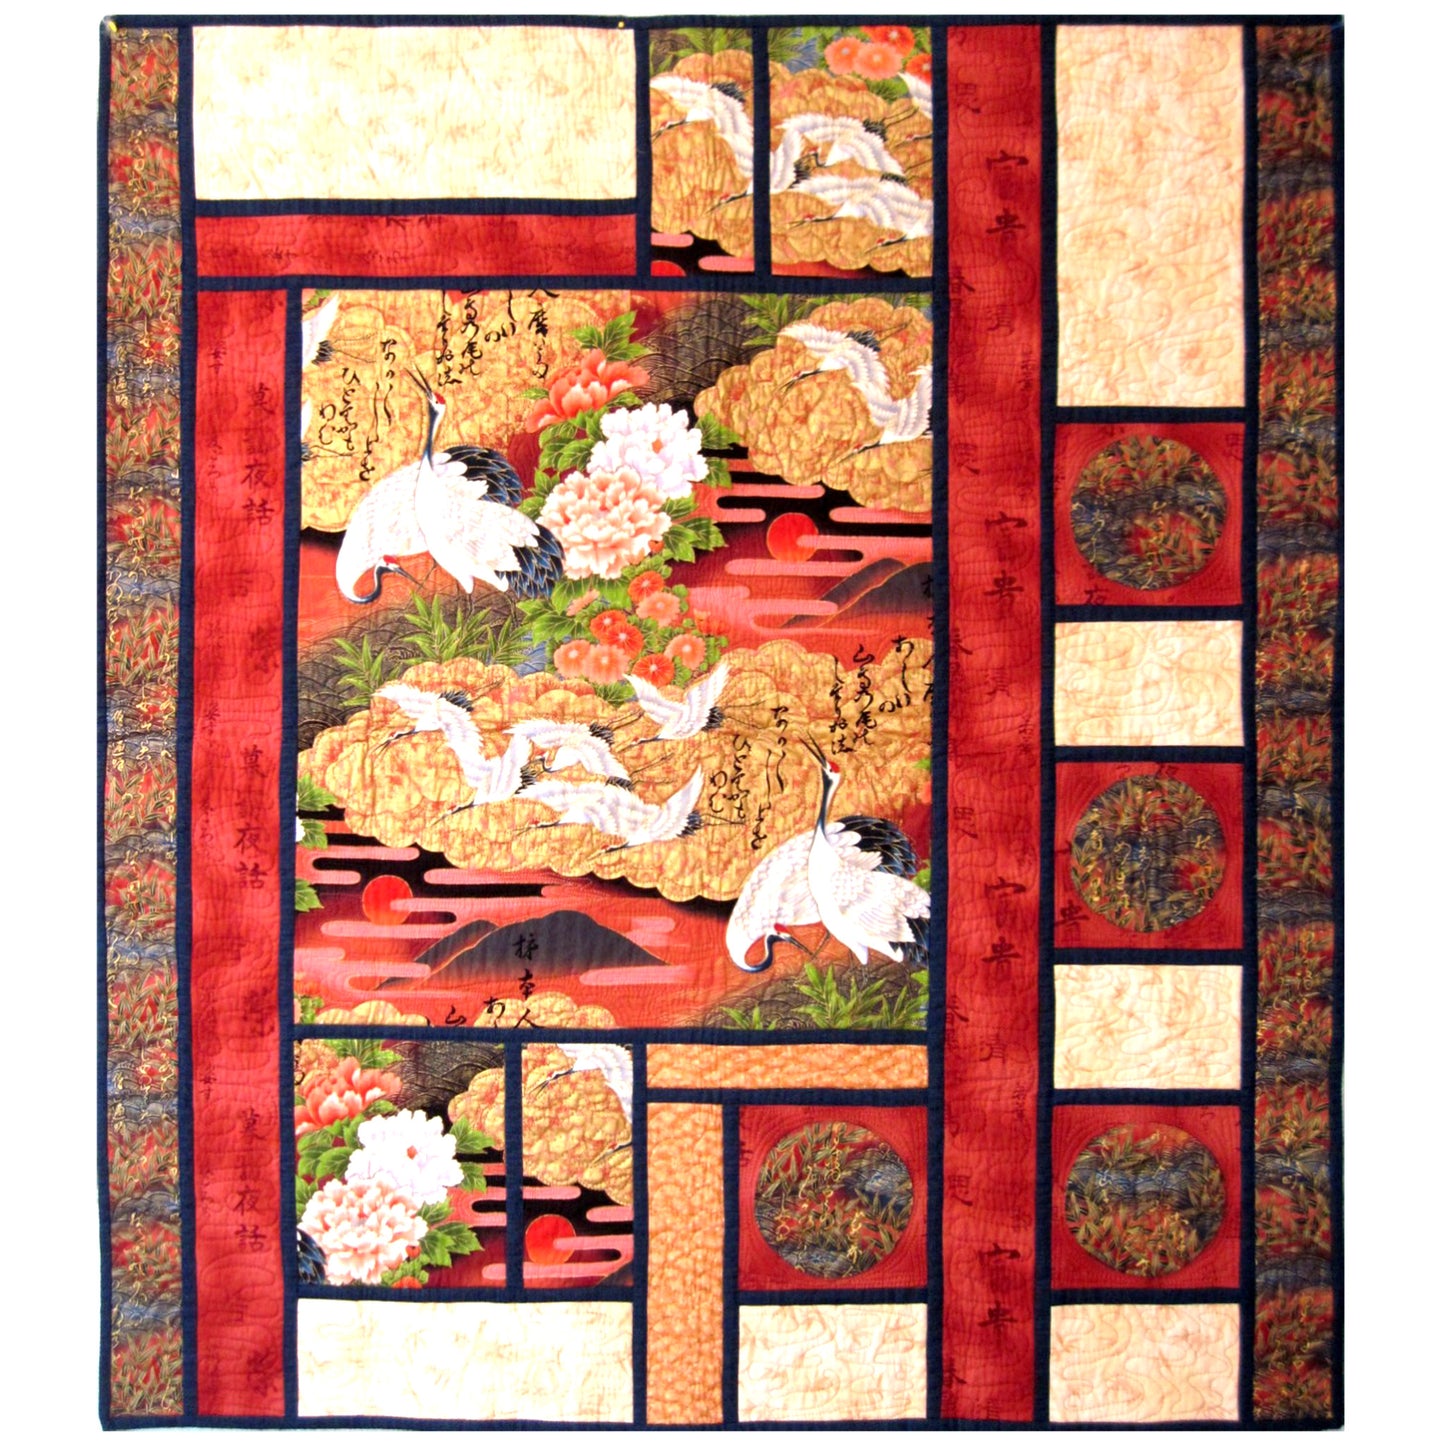 Gardens of Serenity Wall Hanging Quilt Pattern CF-227 - Paper Pattern